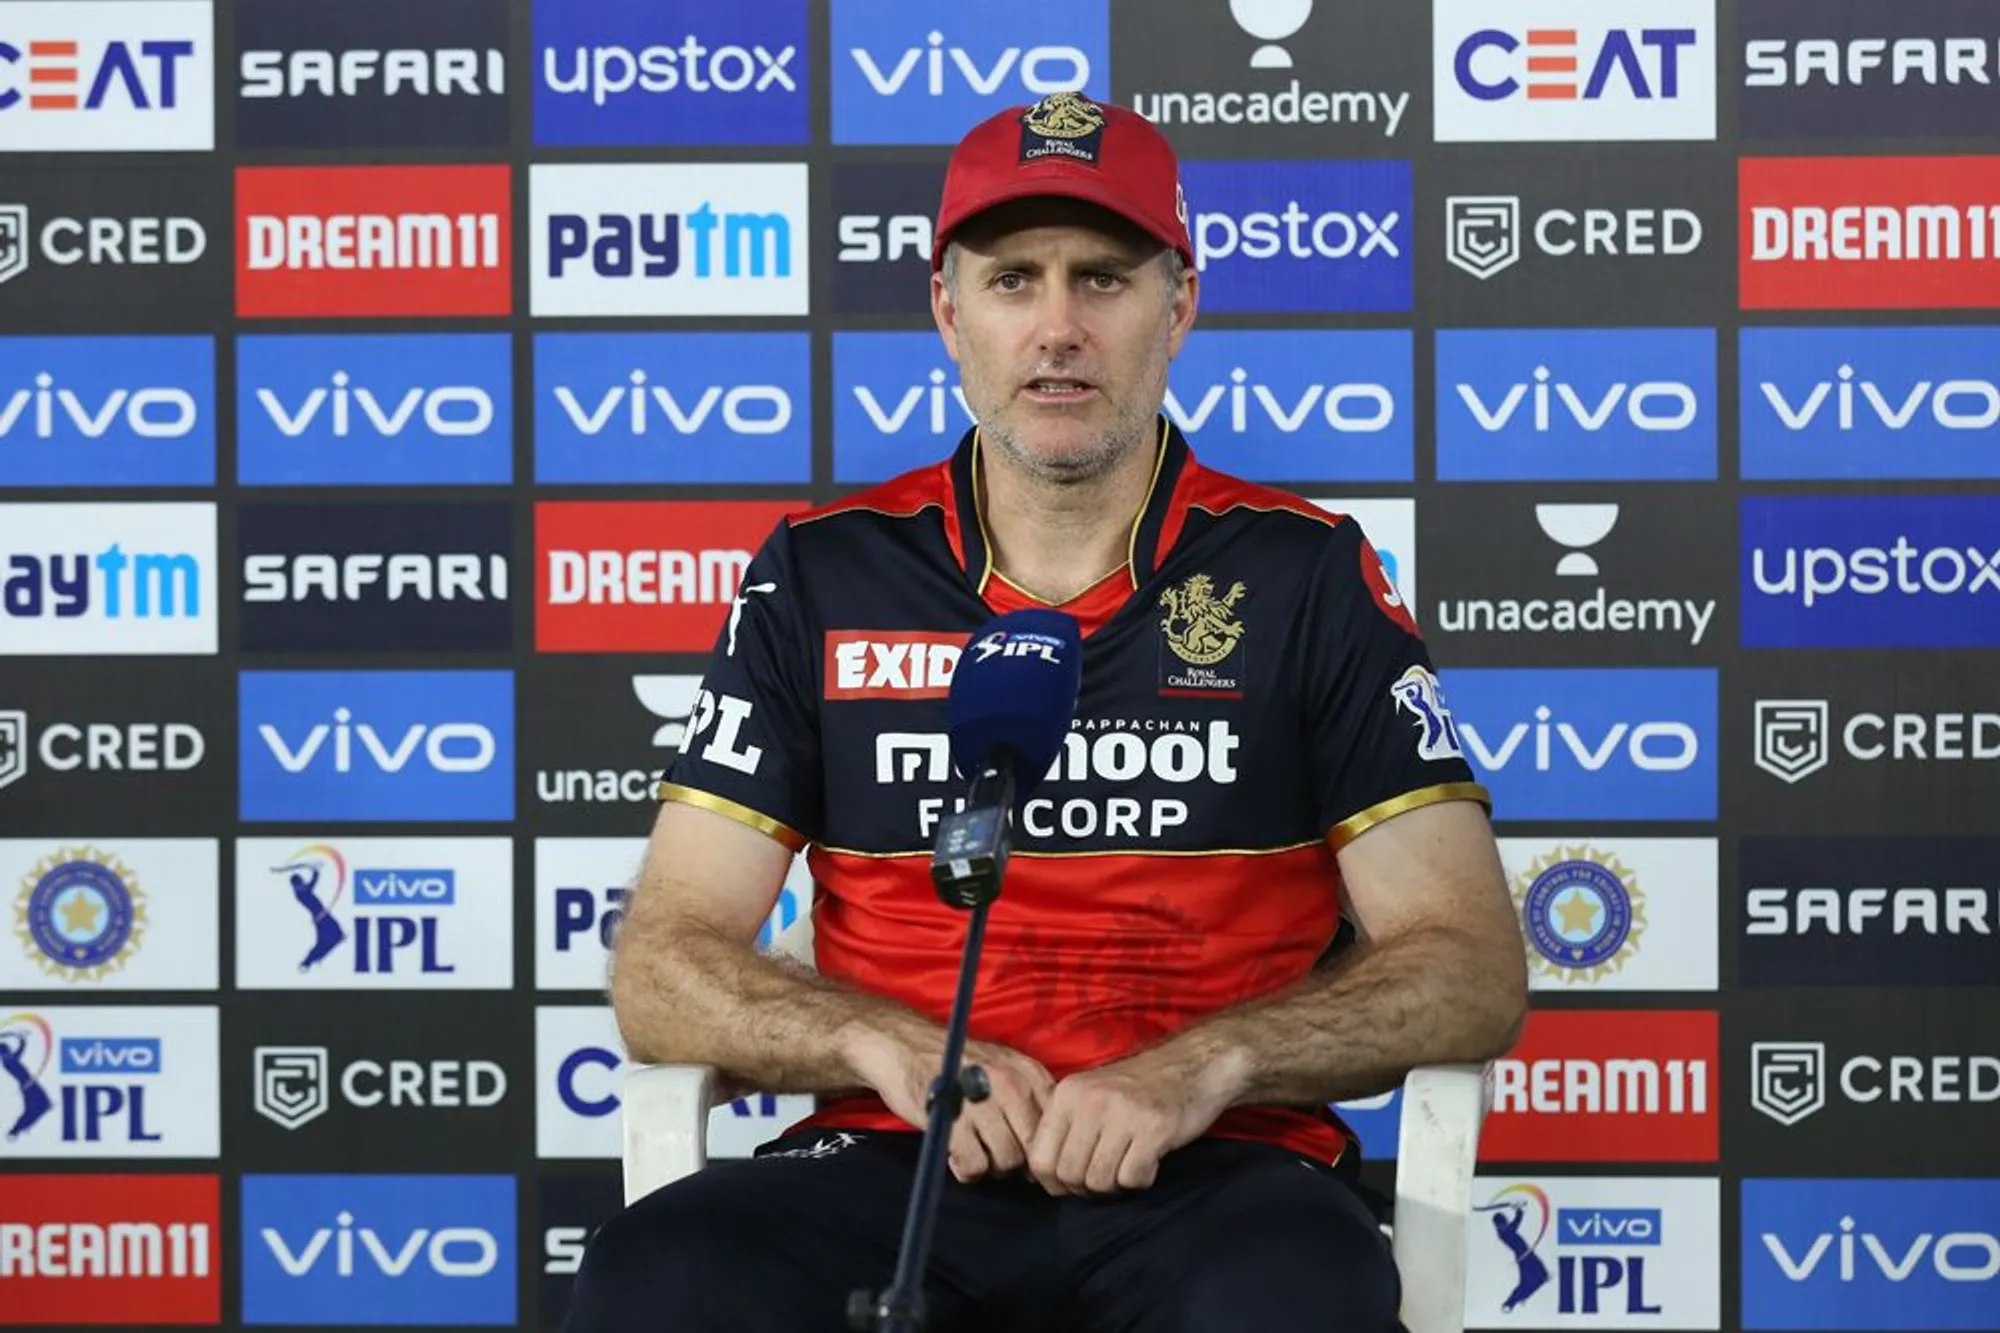 IPL 2021 | Expect RCB to bounce back and put up a good showing versus KKR, states Simon Katich